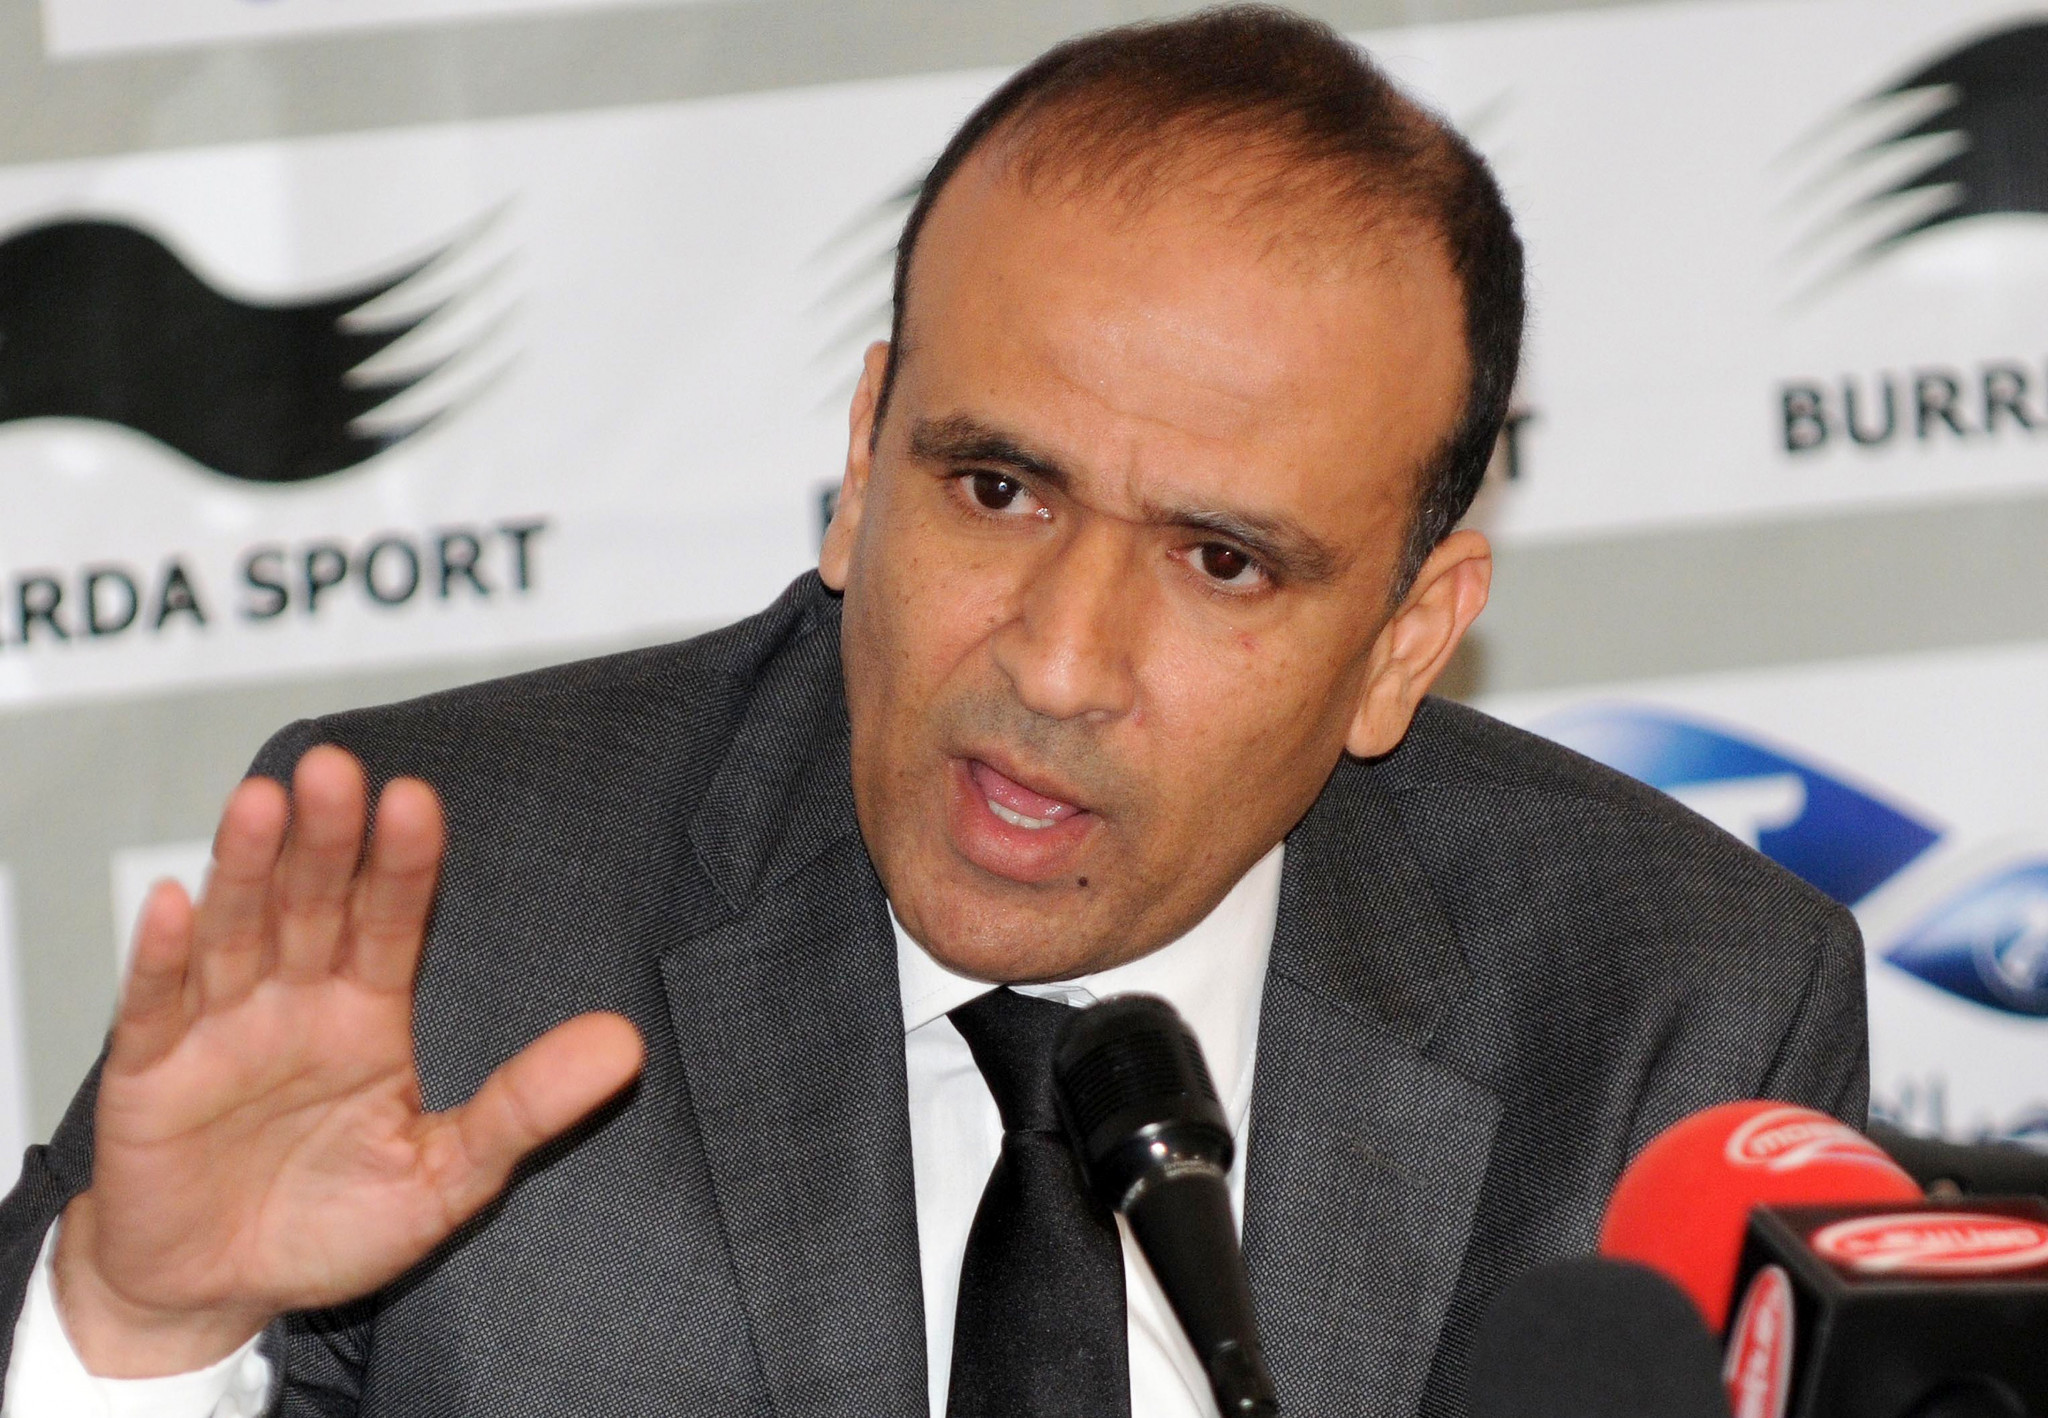 Wadie Jary, President of the Tunisian Football Federation, could challenge Ahmad at next year's election